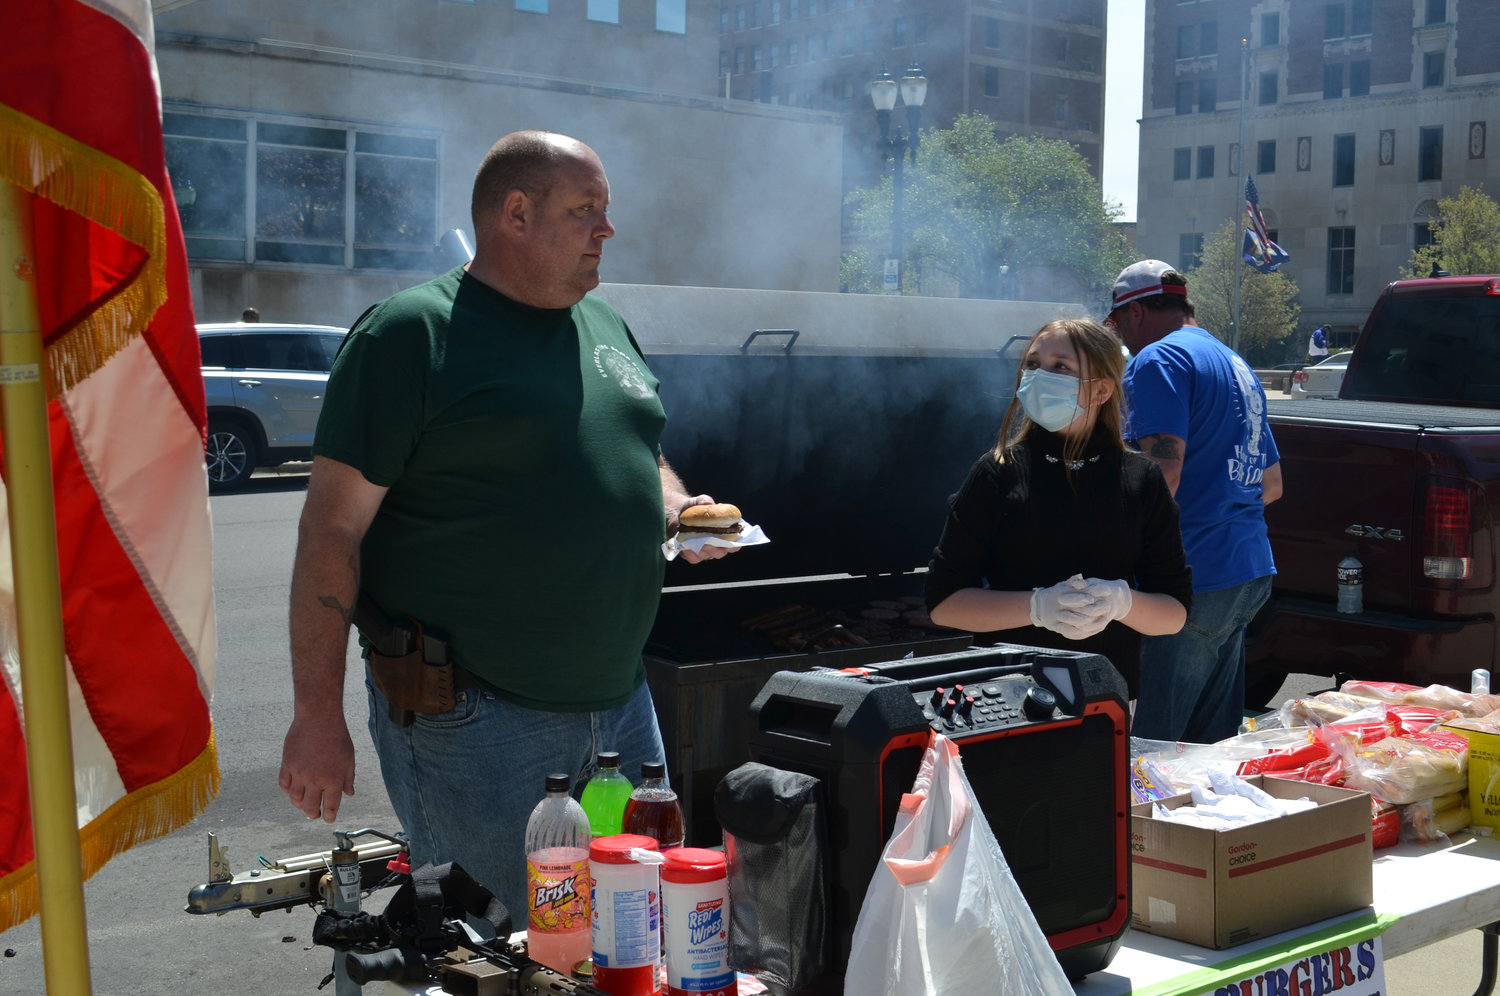 A burger stand distributes food to protesters.